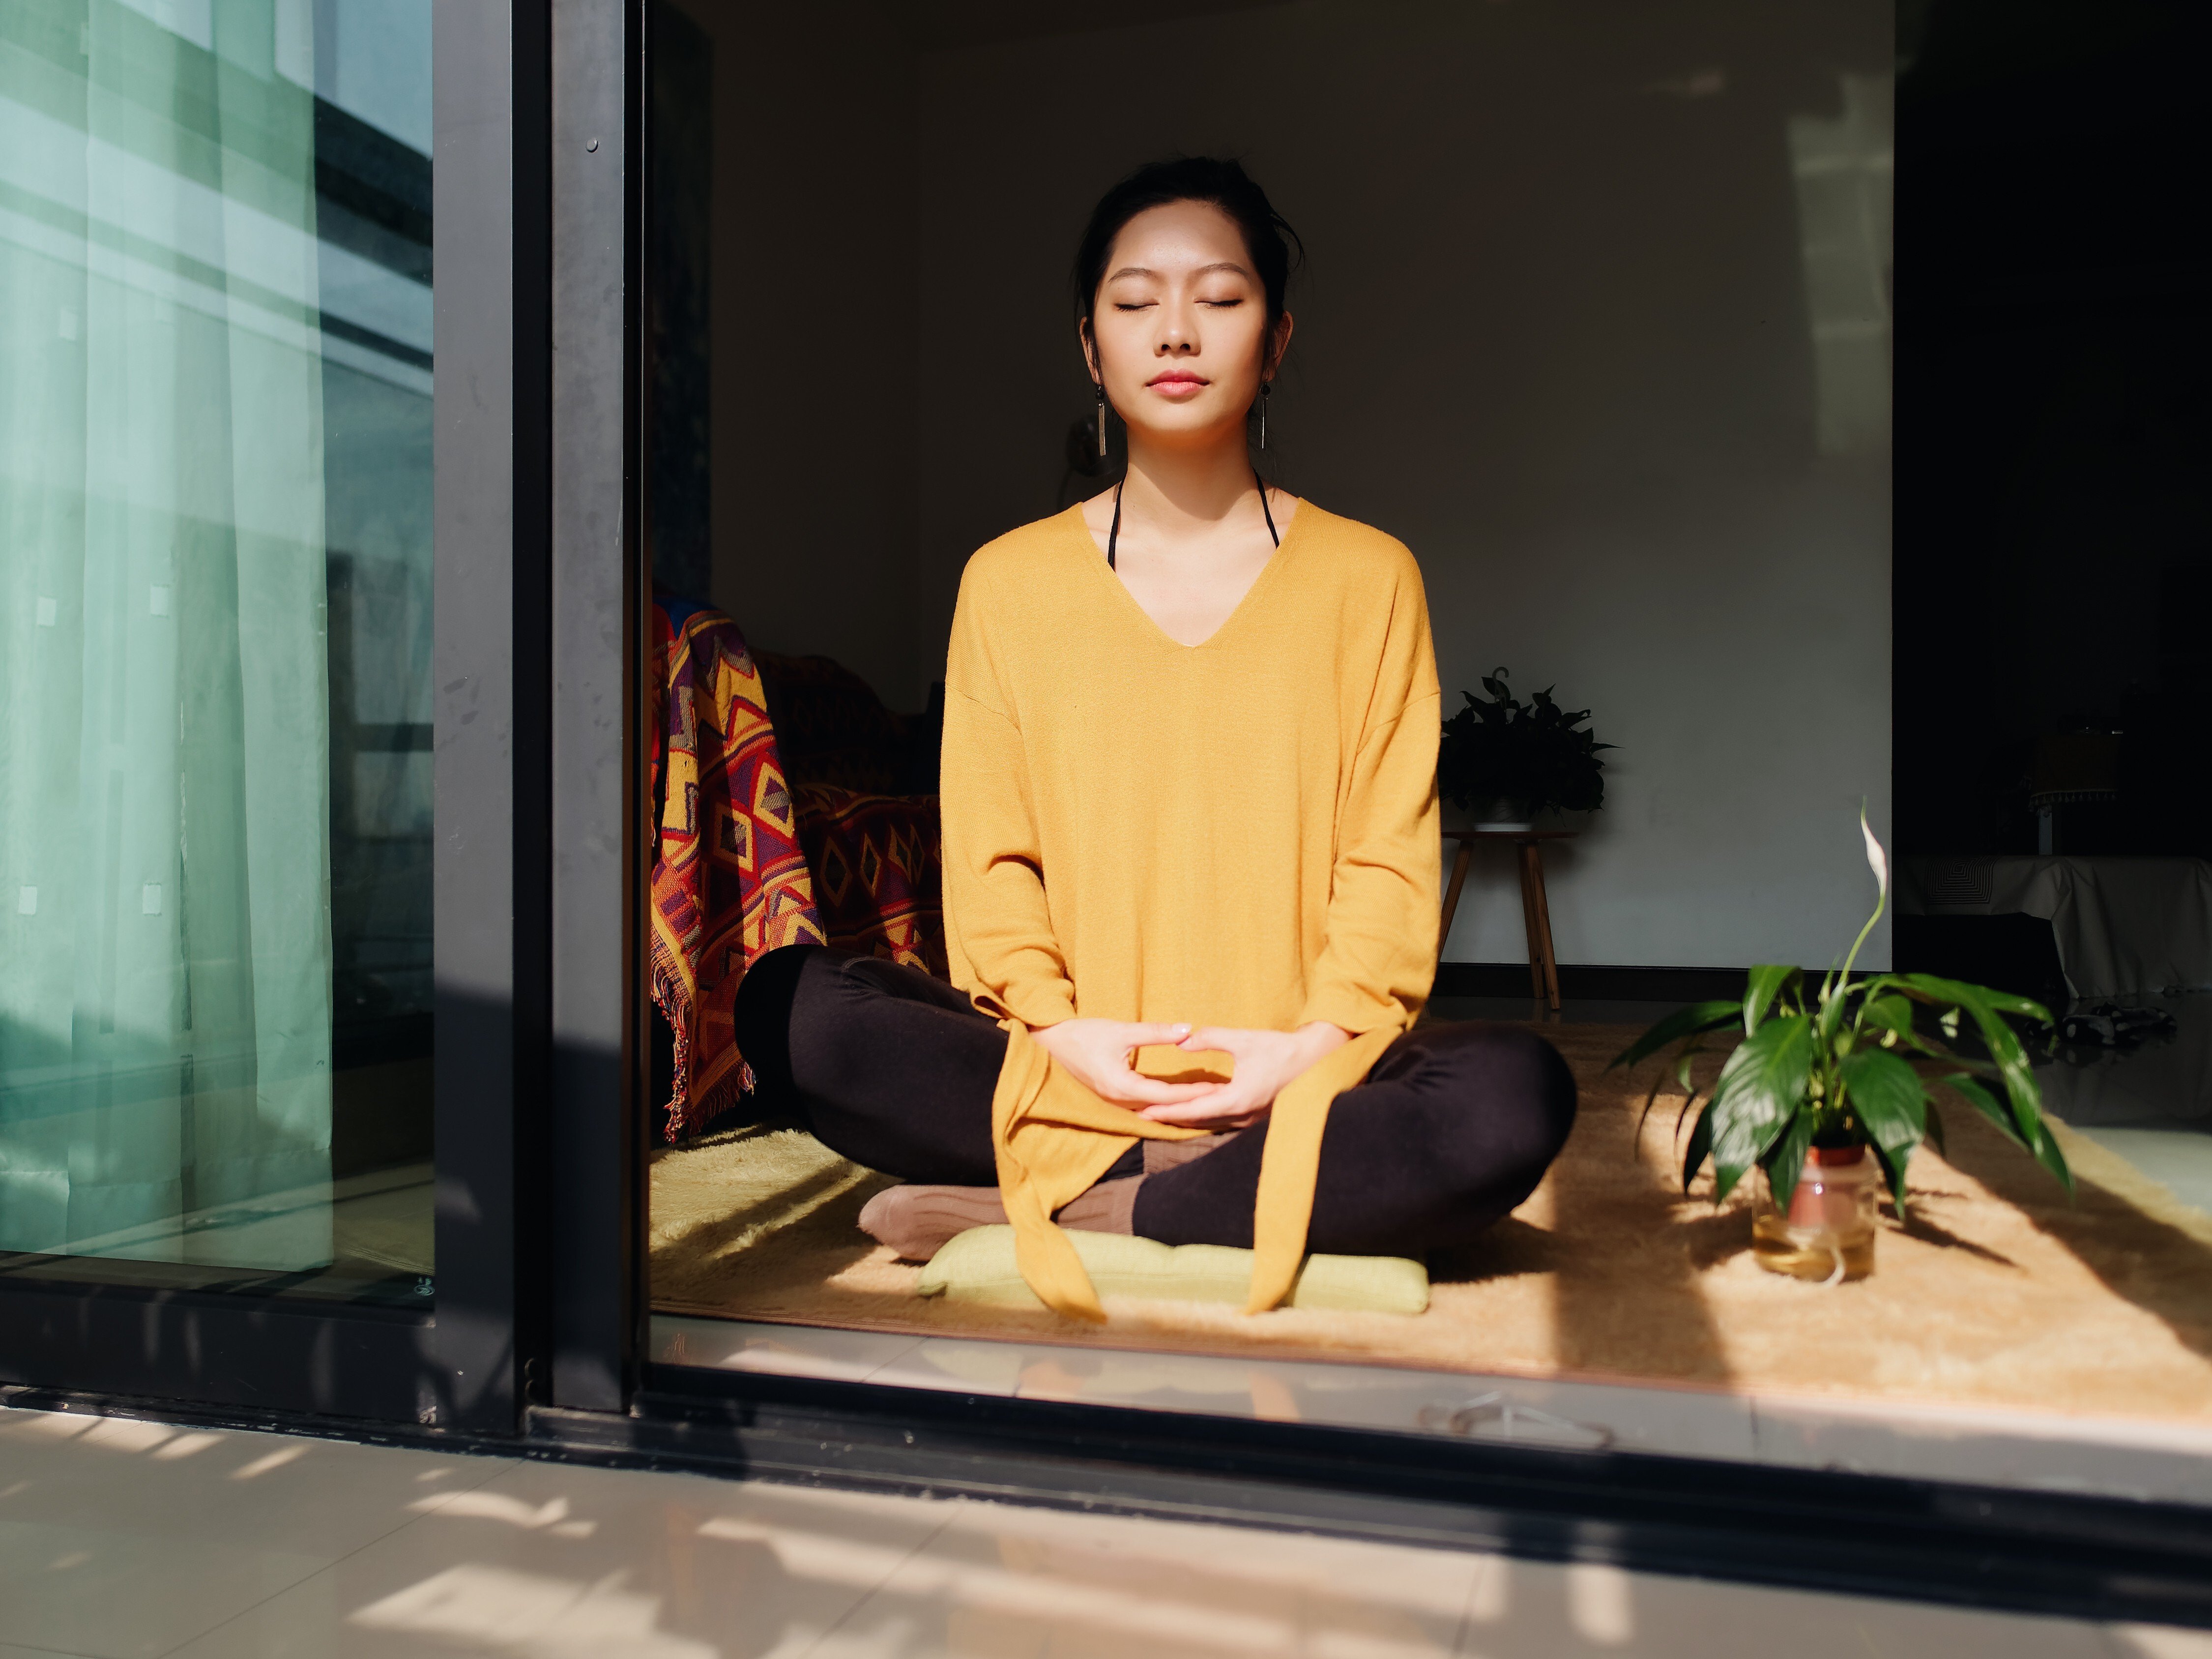 Meditation helps us achieve balance and increases mental well-being. Photo: Shutterstock